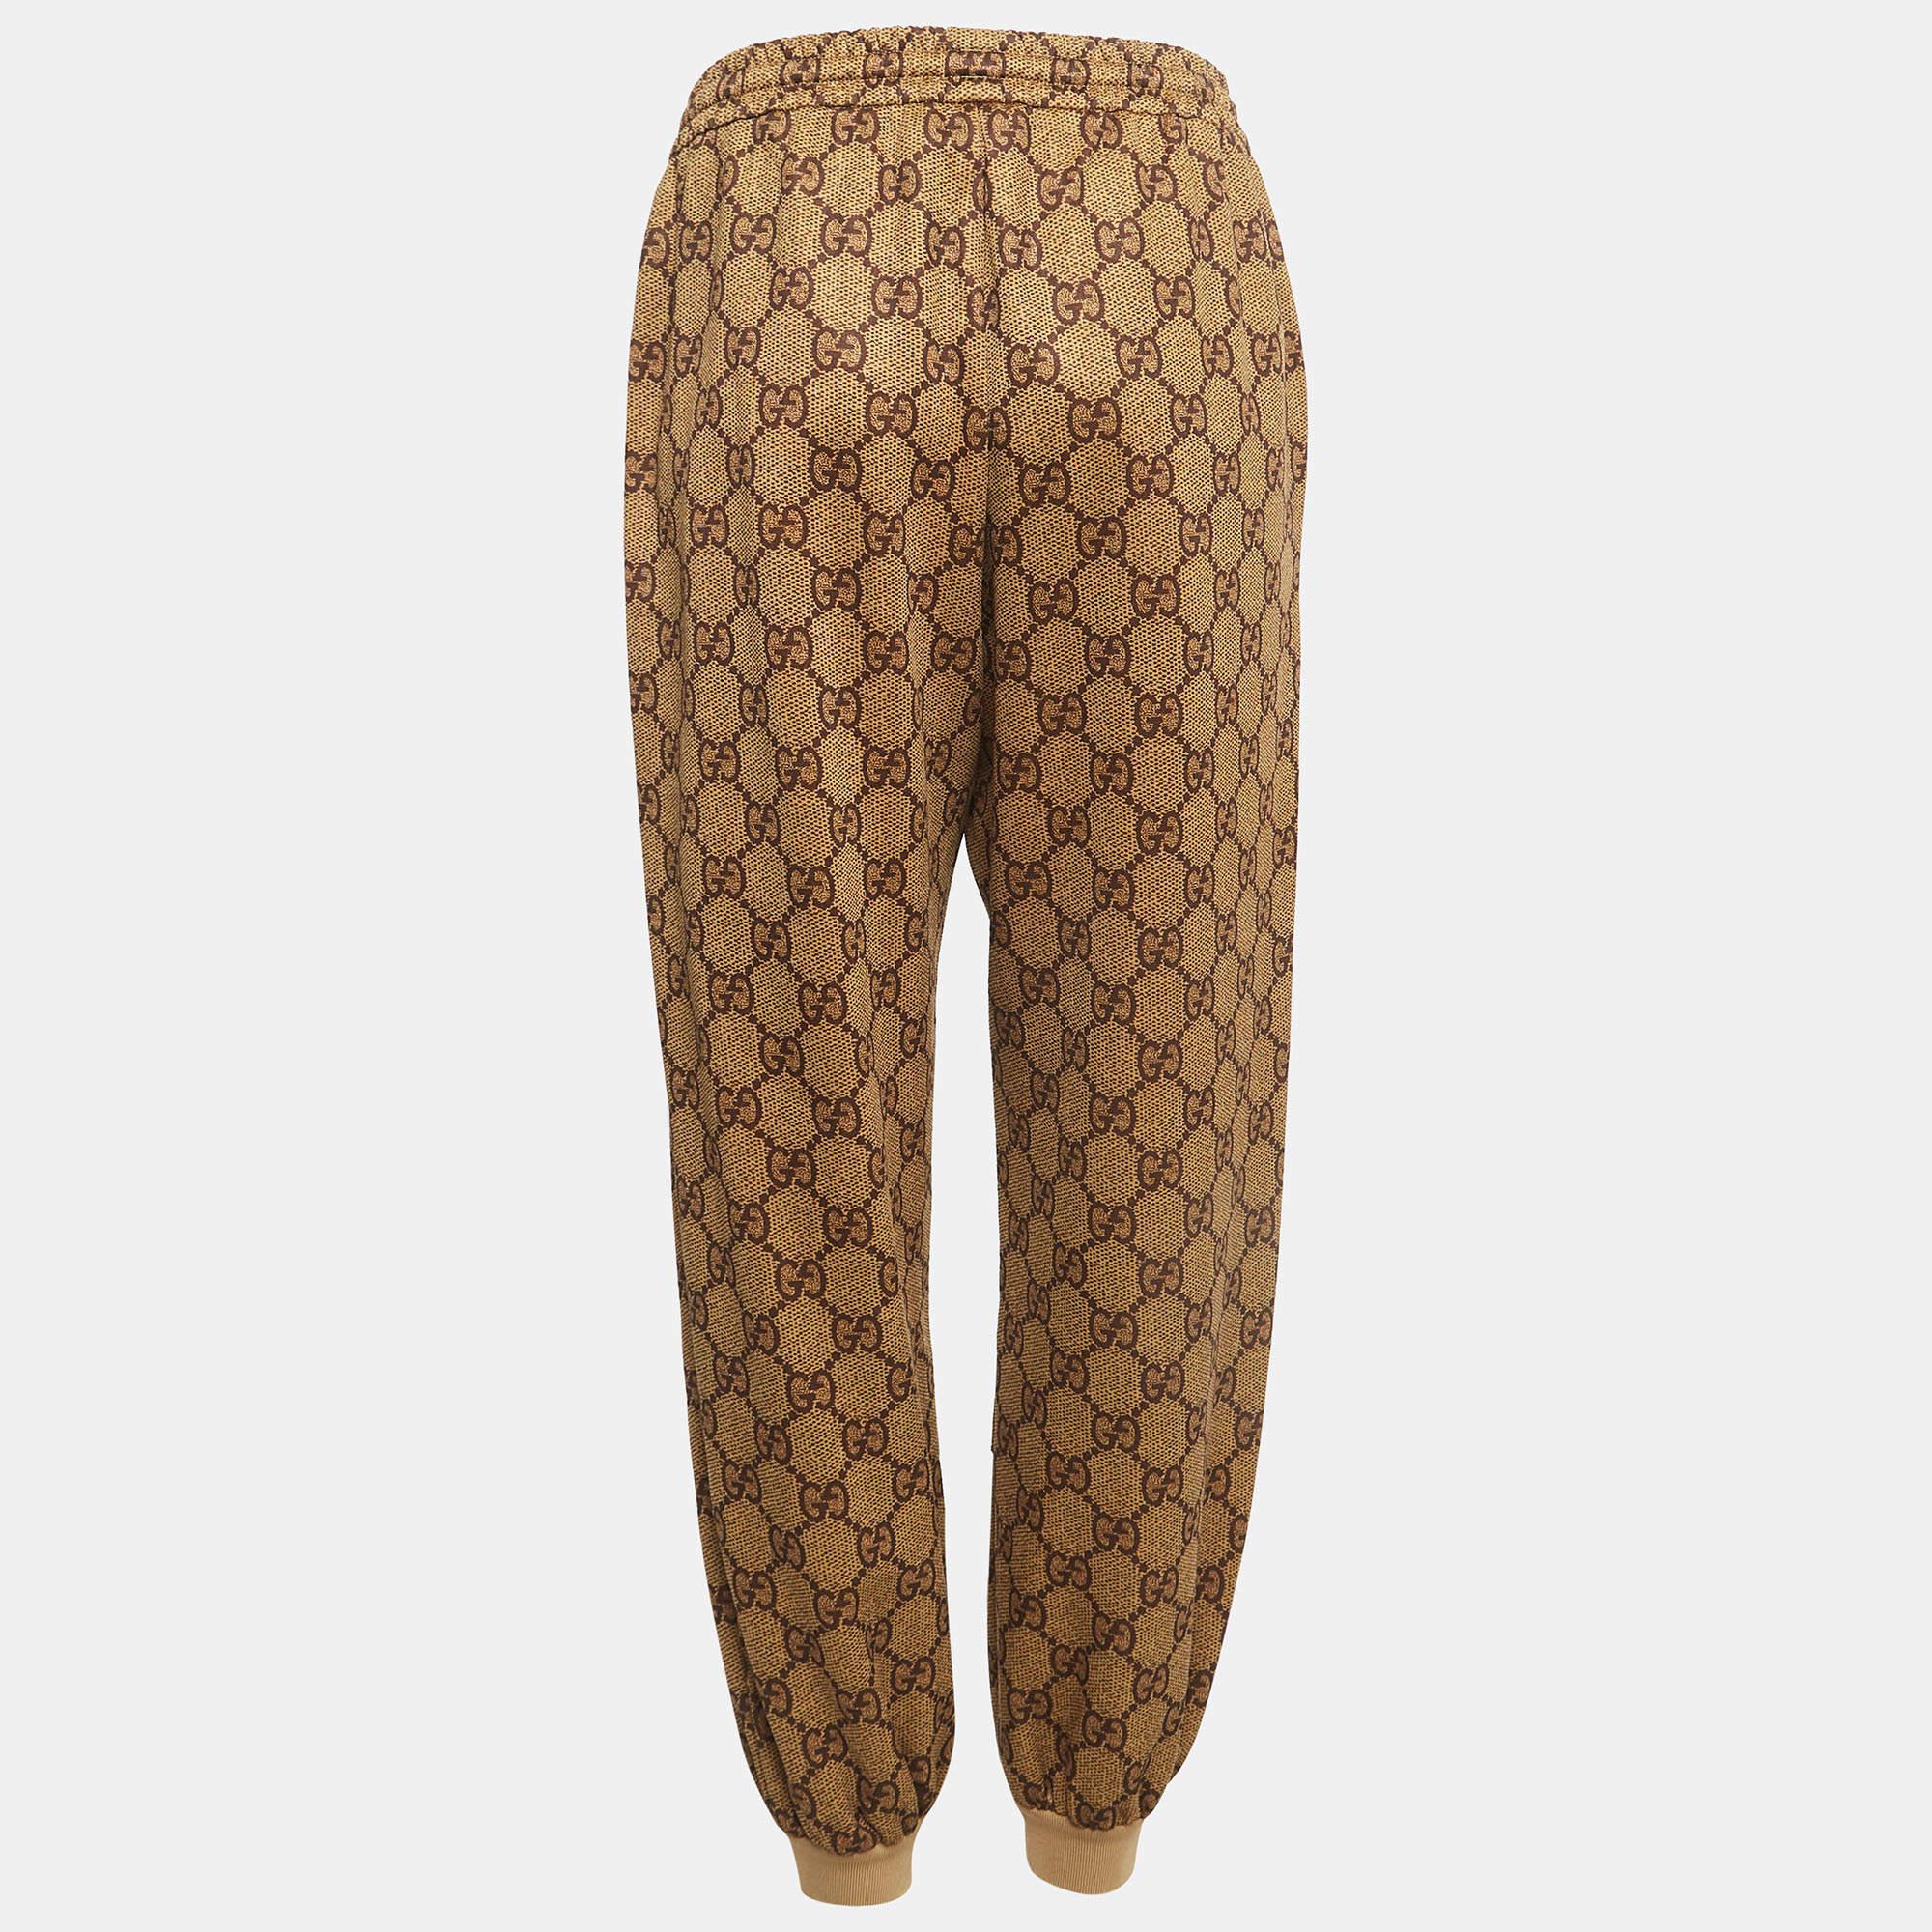 Gucci's track pants are defined by the signature monogram prints all over. Flaunting a brown shade, they offer a great fit and will look good with a tee and sneakers.

